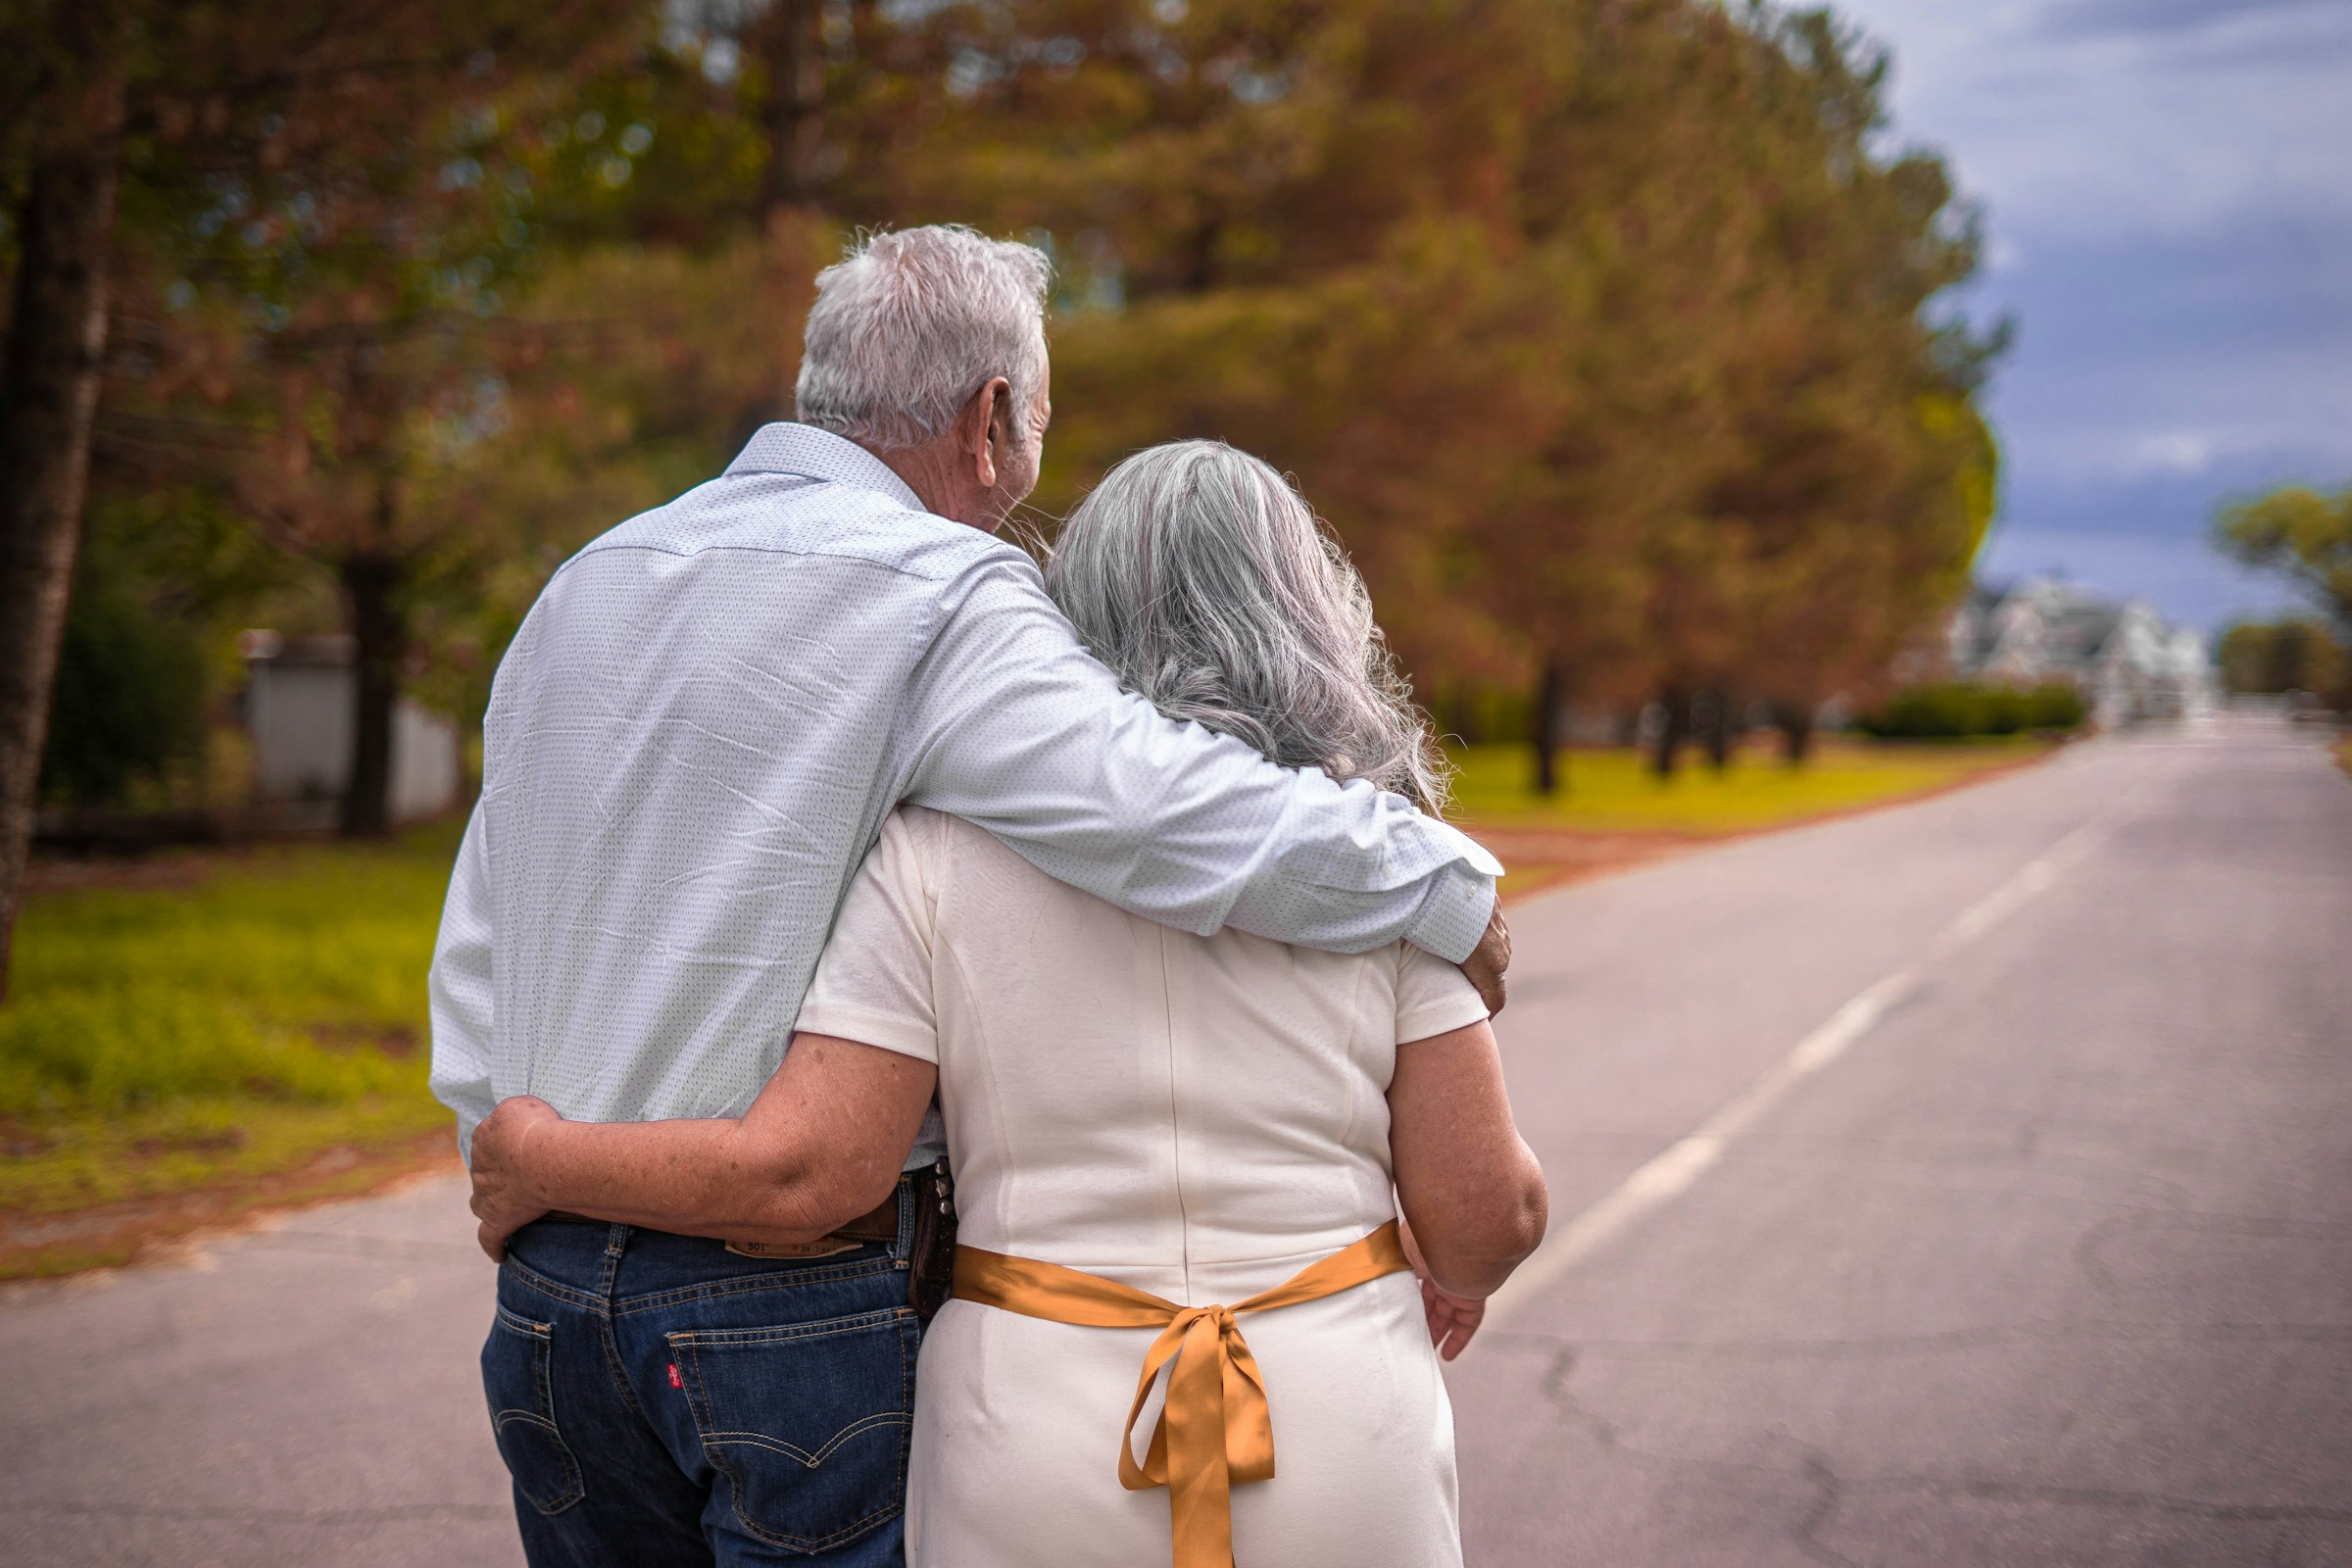 An elderly couple standing on a road | Source: Pexels